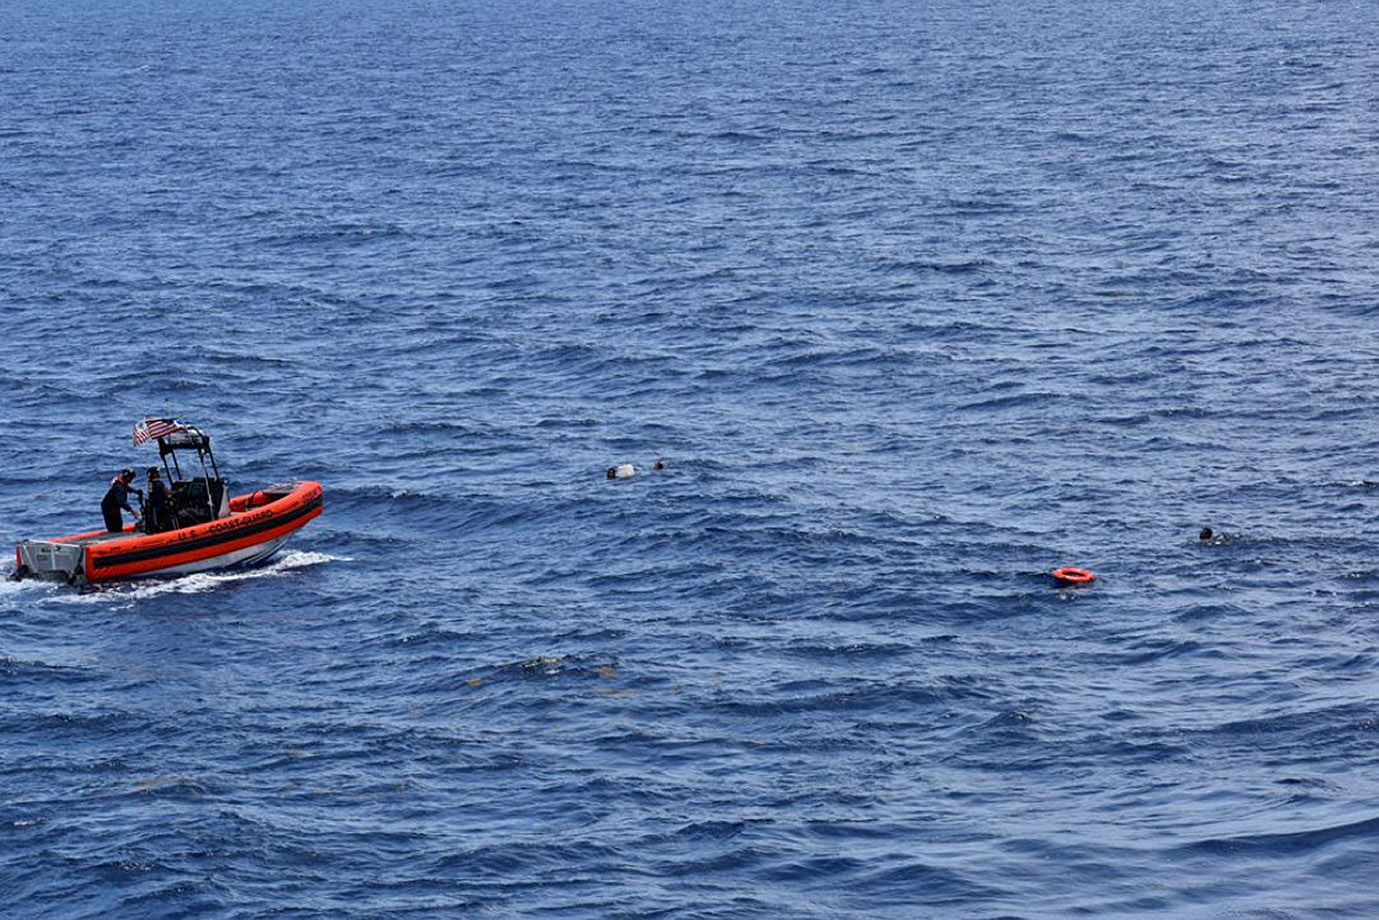 PHOTO: An image posted by the U.S. Coast Guard via Twitter on May 28, 2021, shows the ongoing search and rescue efforts after 10 people were reported missing when a boat traveling from Cuba capsized near Key West, Fla.